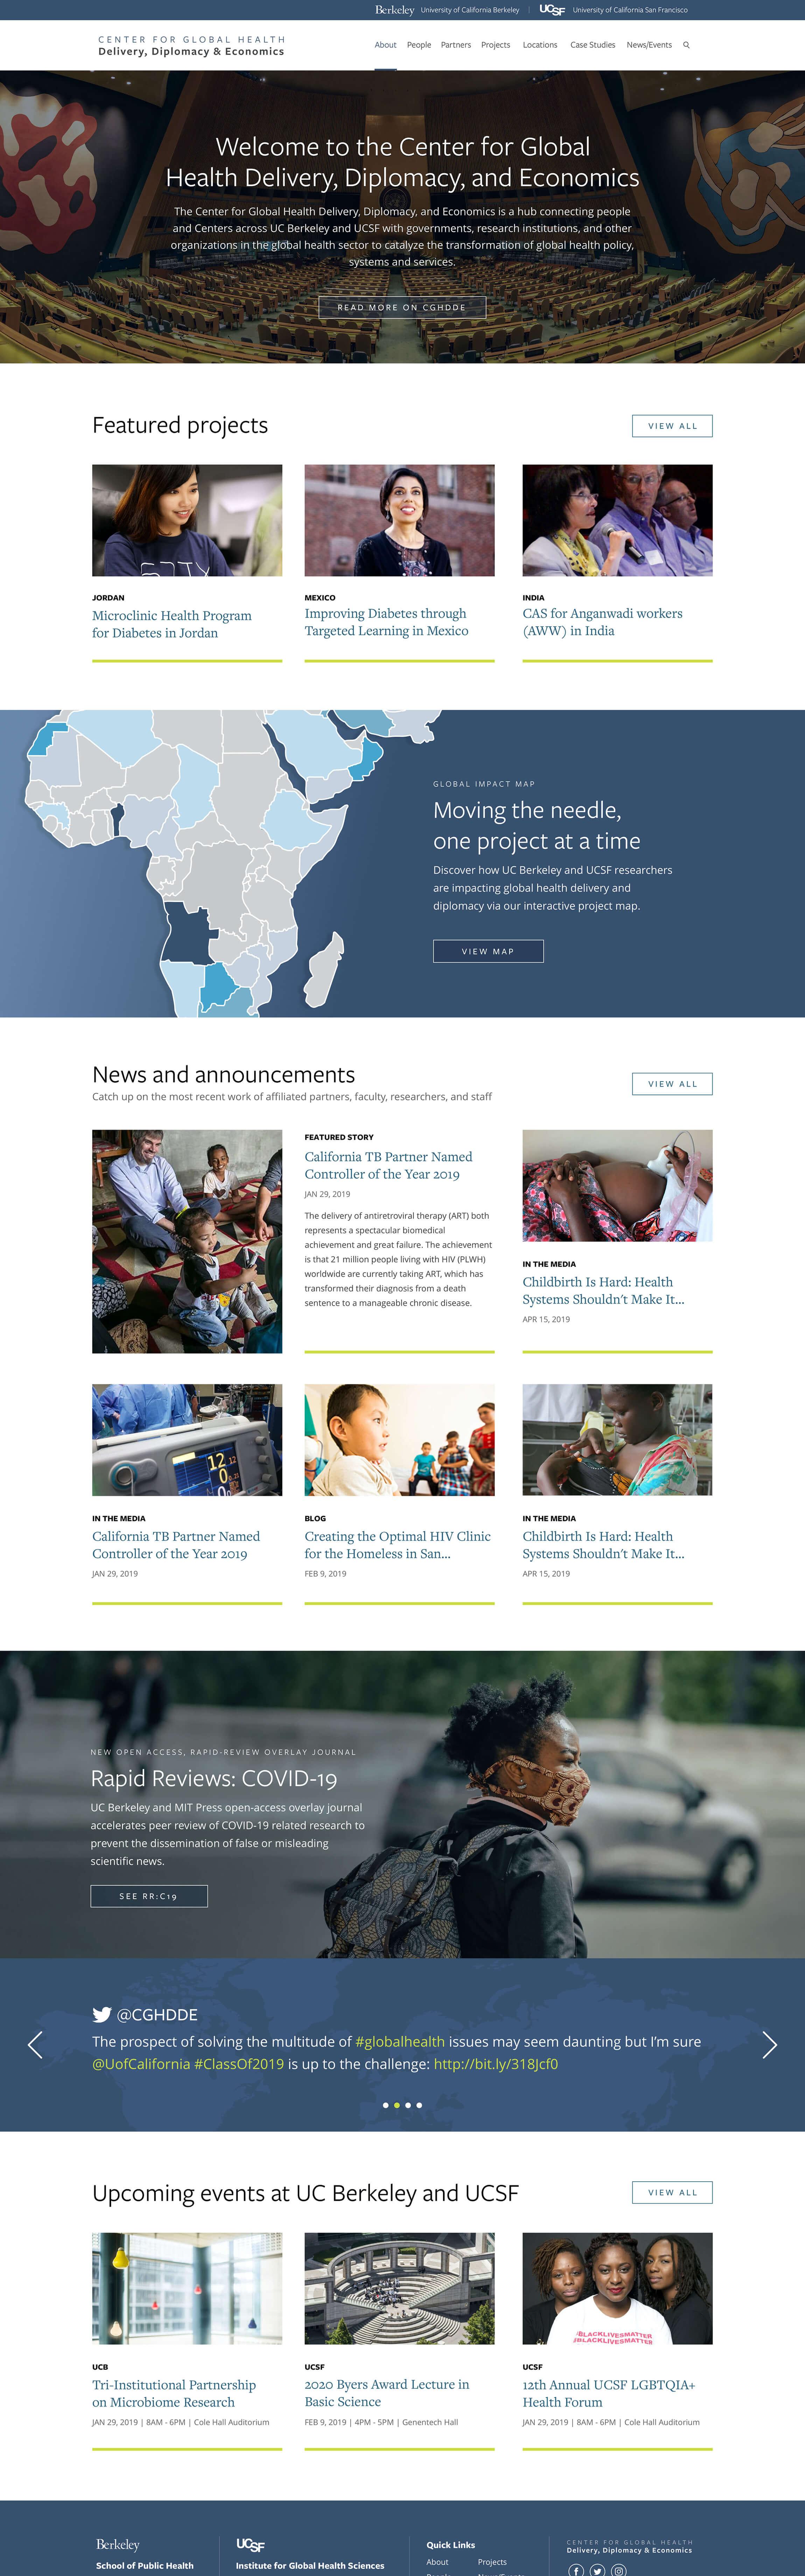 A desktop screenshot of the Center for Global Health Delivery, Diplomacy & Economics homepage